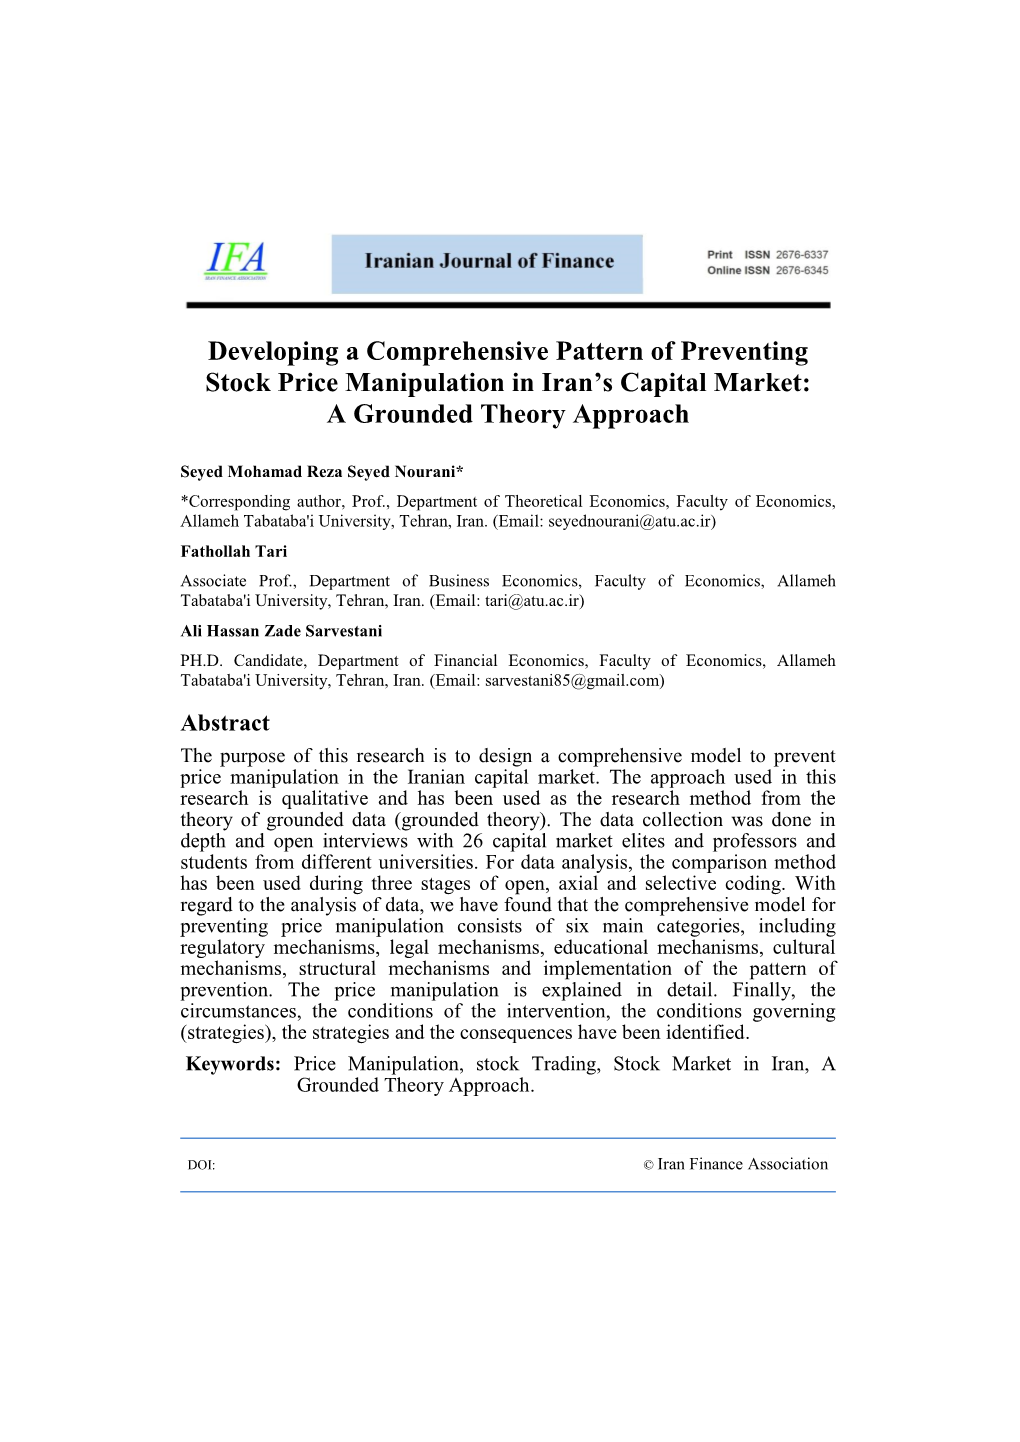 Developing a Comprehensive Pattern of Preventing Stock Price Manipulation in Iran’S Capital Market: a Grounded Theory Approach